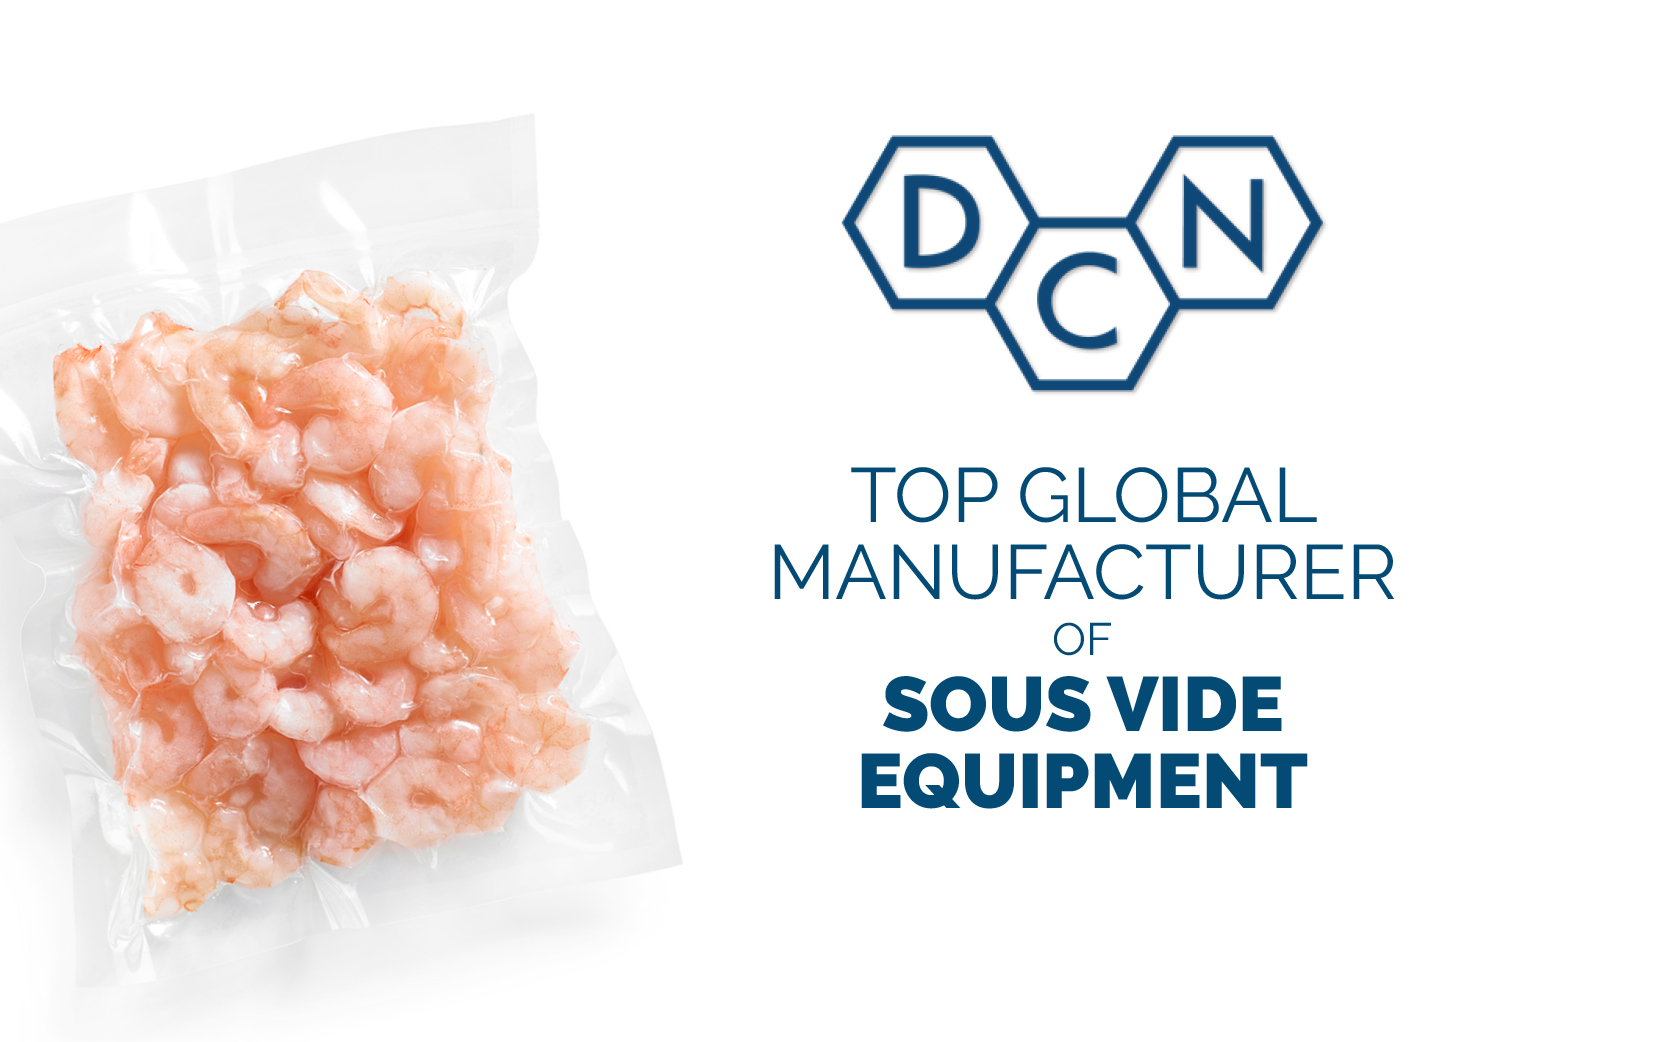 a vacuum sealed bag of shrimp ready to be cooked in a sous vide tank manufactured by DC Norris North America sits next to the announcement that DC Norris & Company has been named a top global manufacturer of sous vide equipment